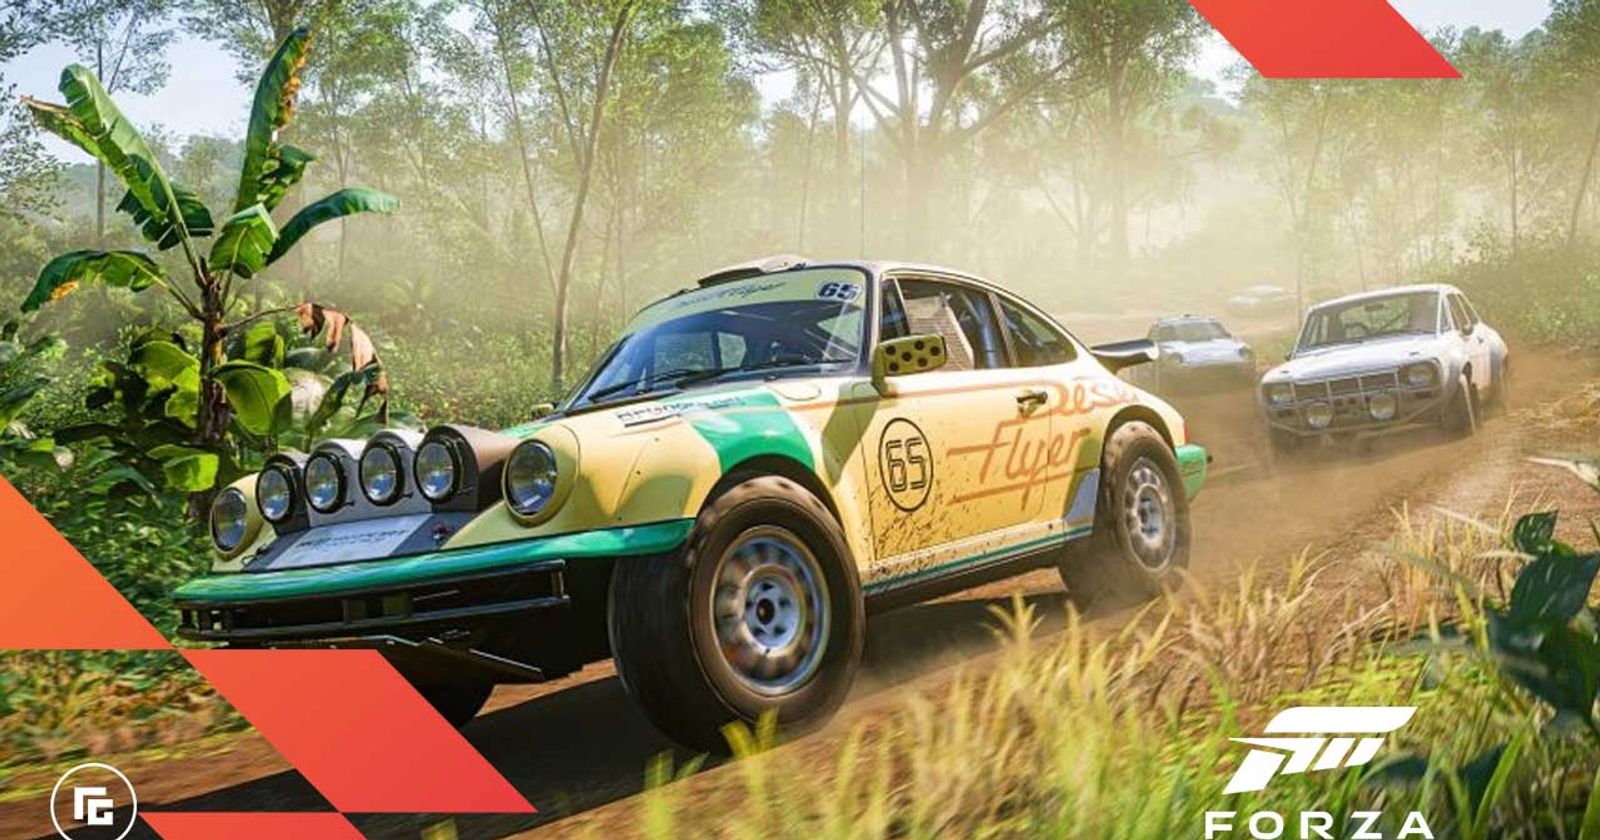 Forza Horizon 4 Sees Two Million Players in Its First Week - Xbox Wire